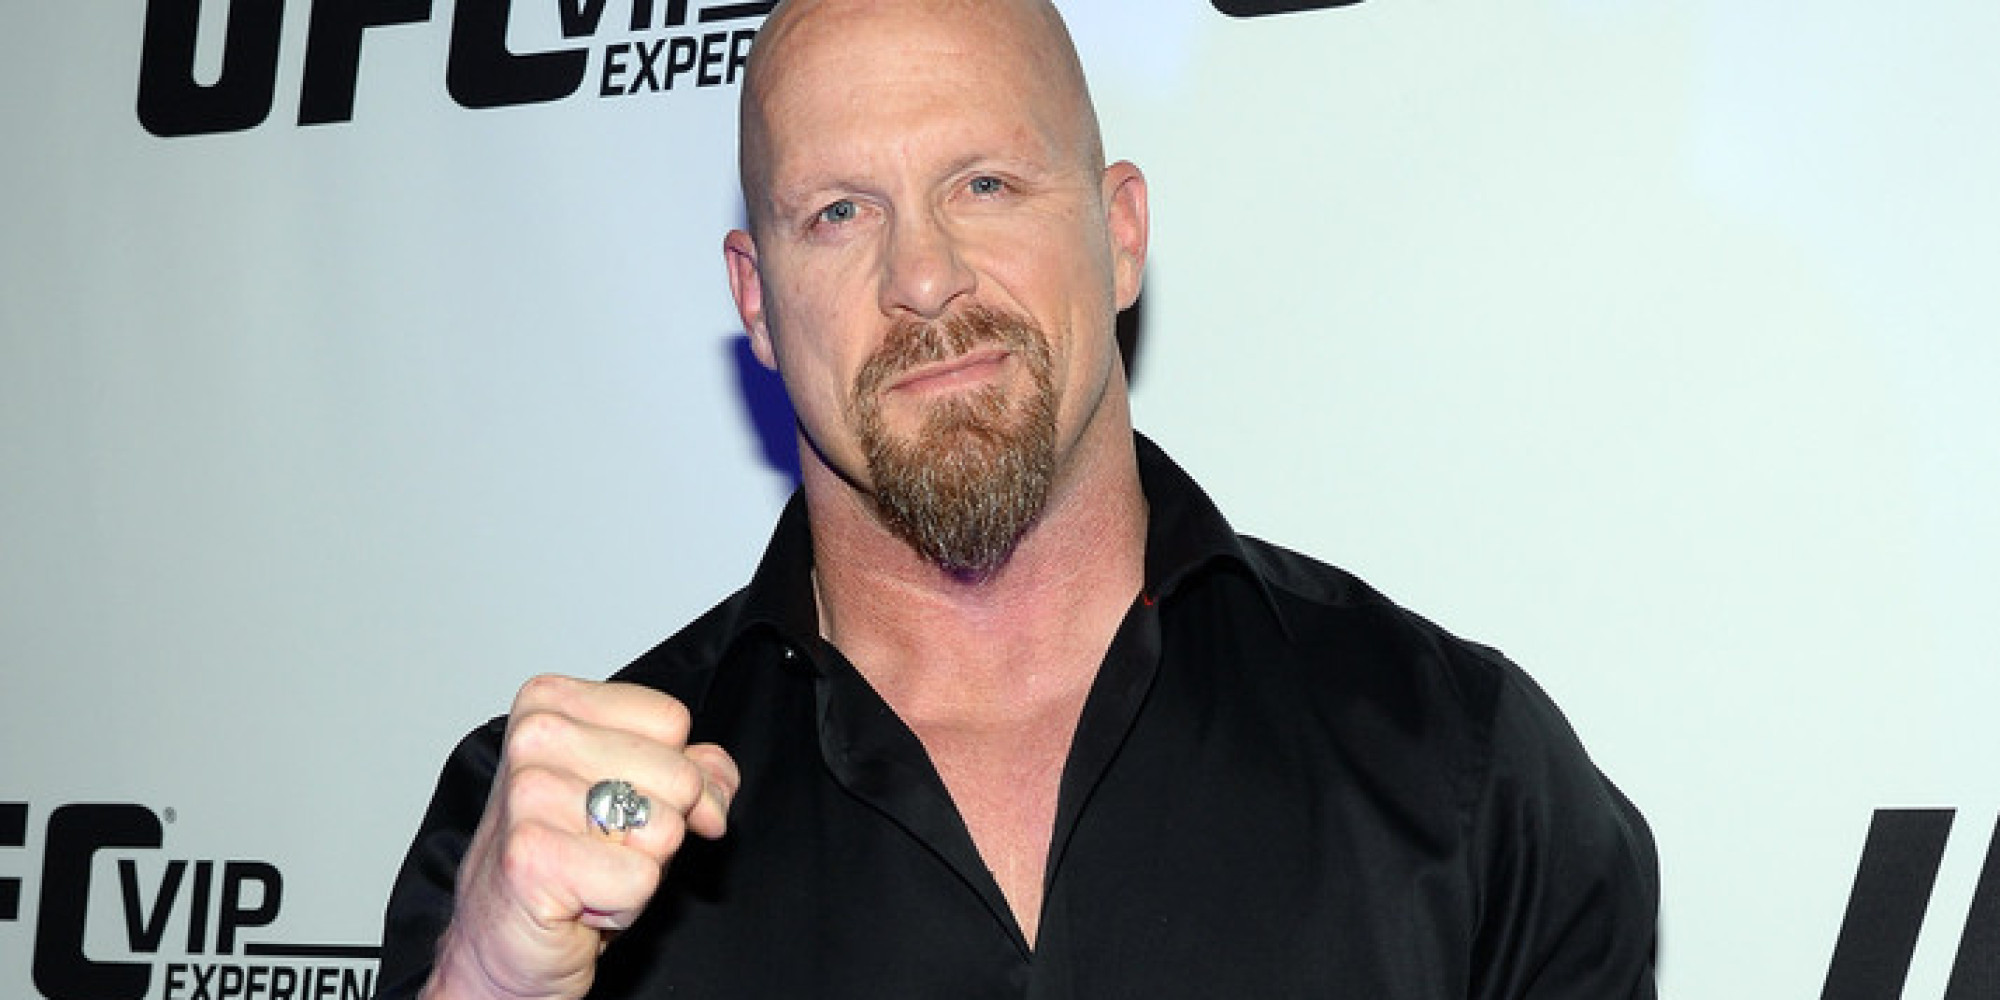 Wwe Star Stone Cold Steve Austin Slams Marriage Equality Opponents In